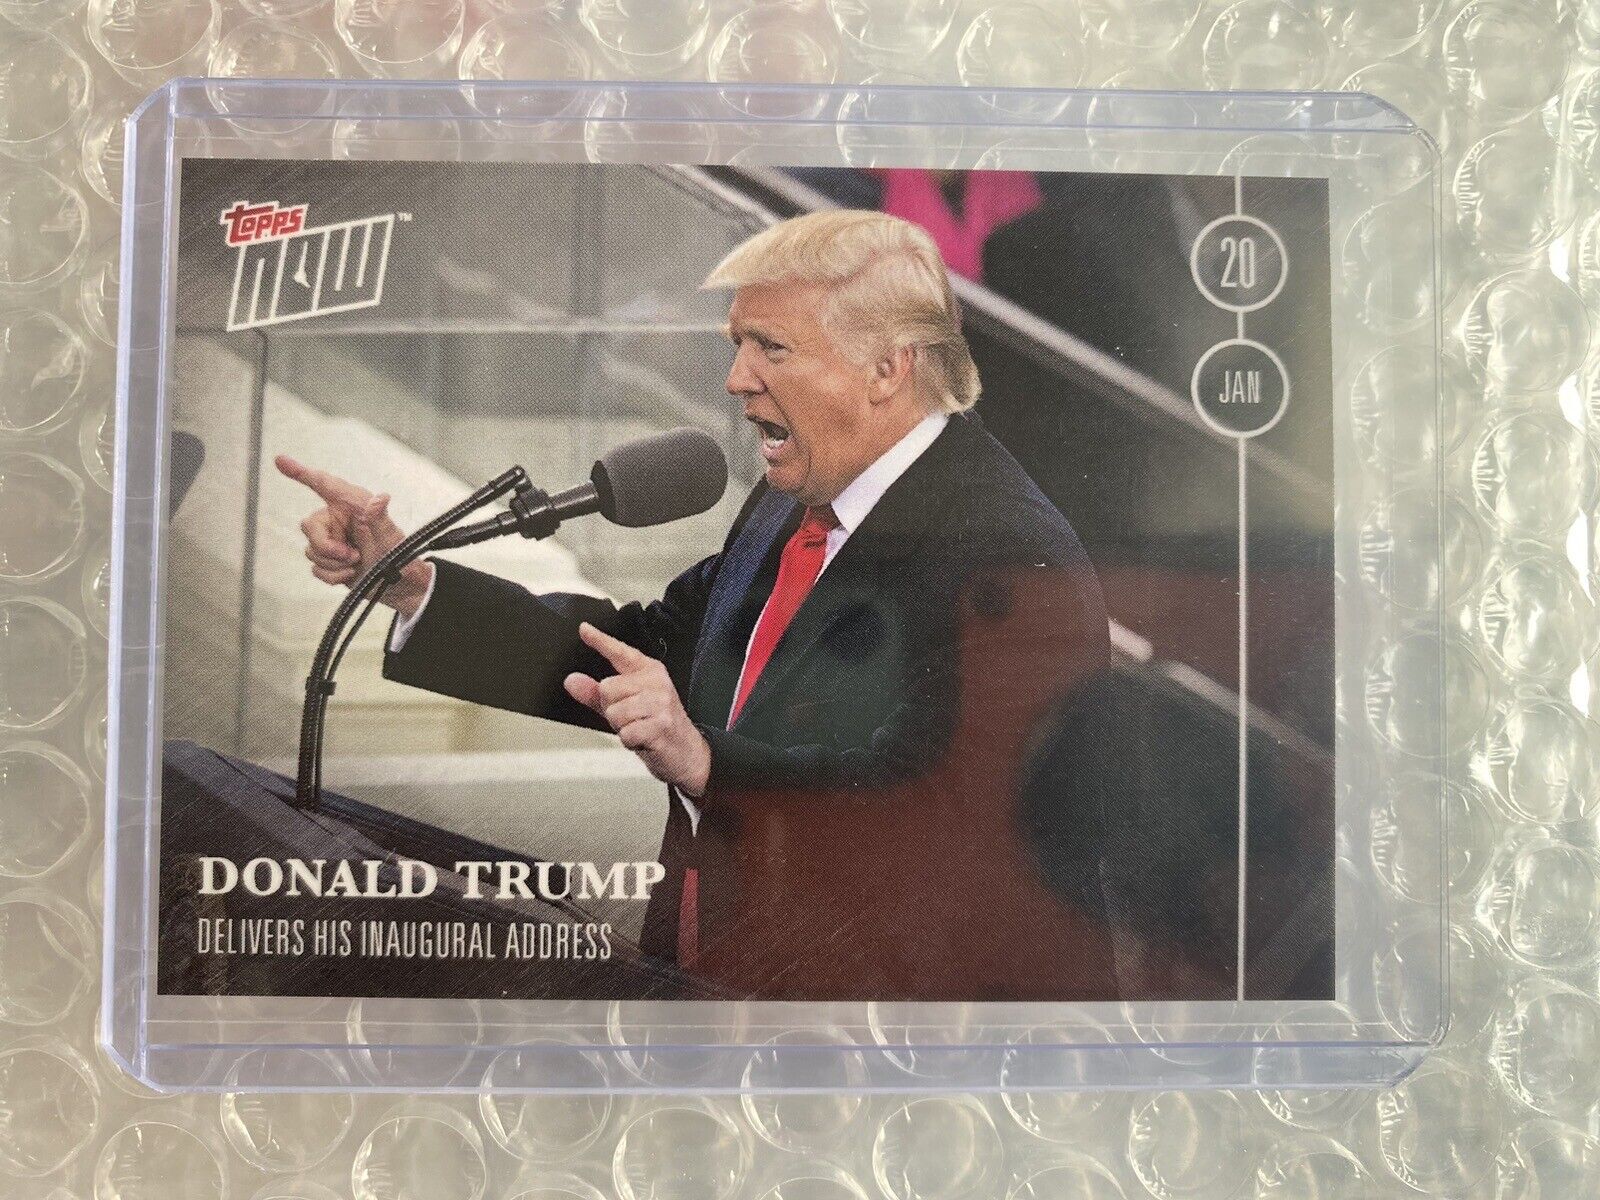 2016 Topps Now Election Donald Trump Delivers His Inaugural Address